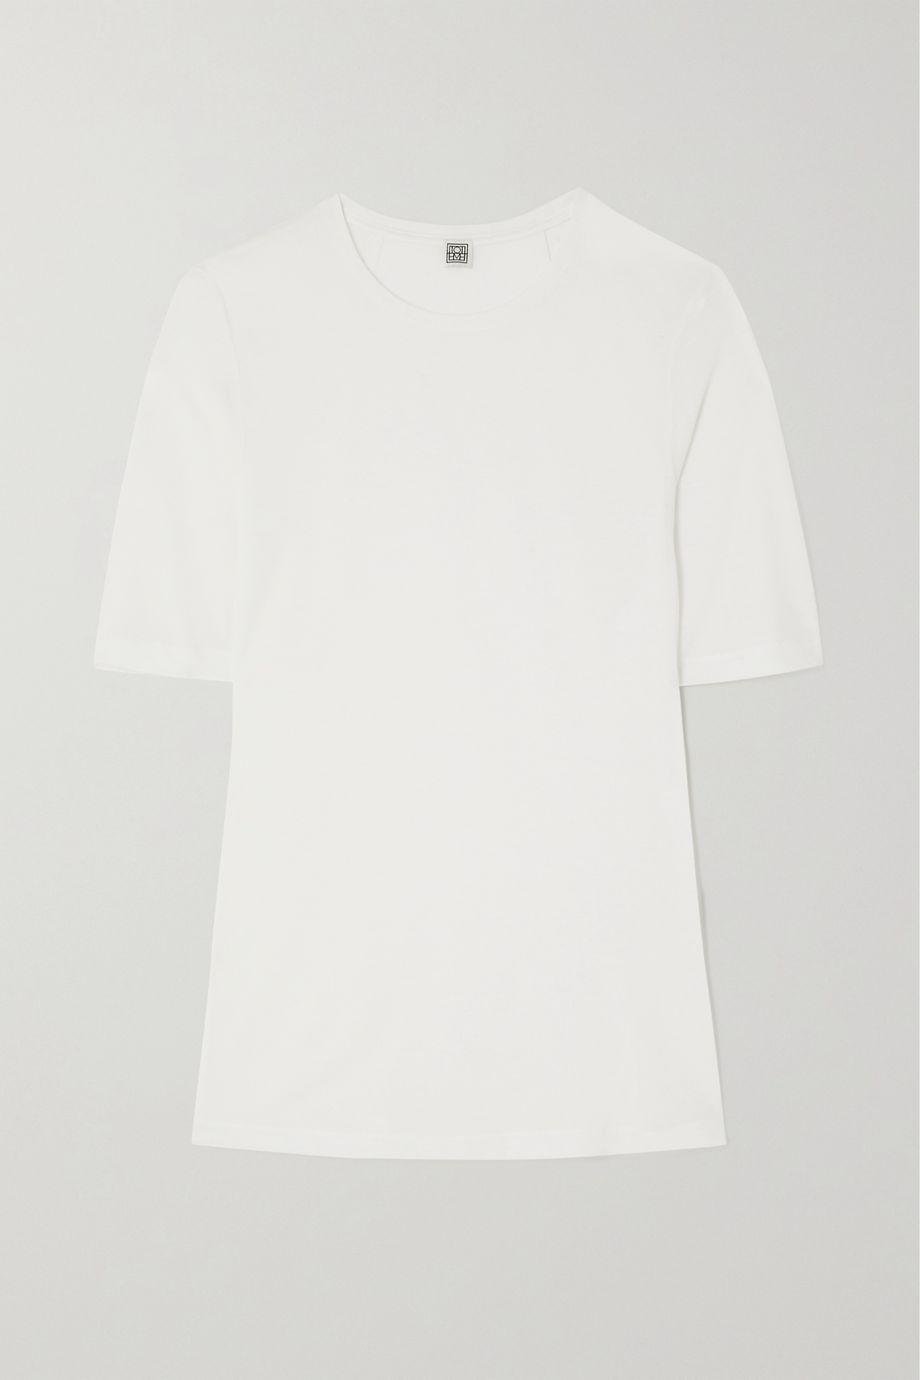 Modal and cashmere-blend T-shirt by TOTEME